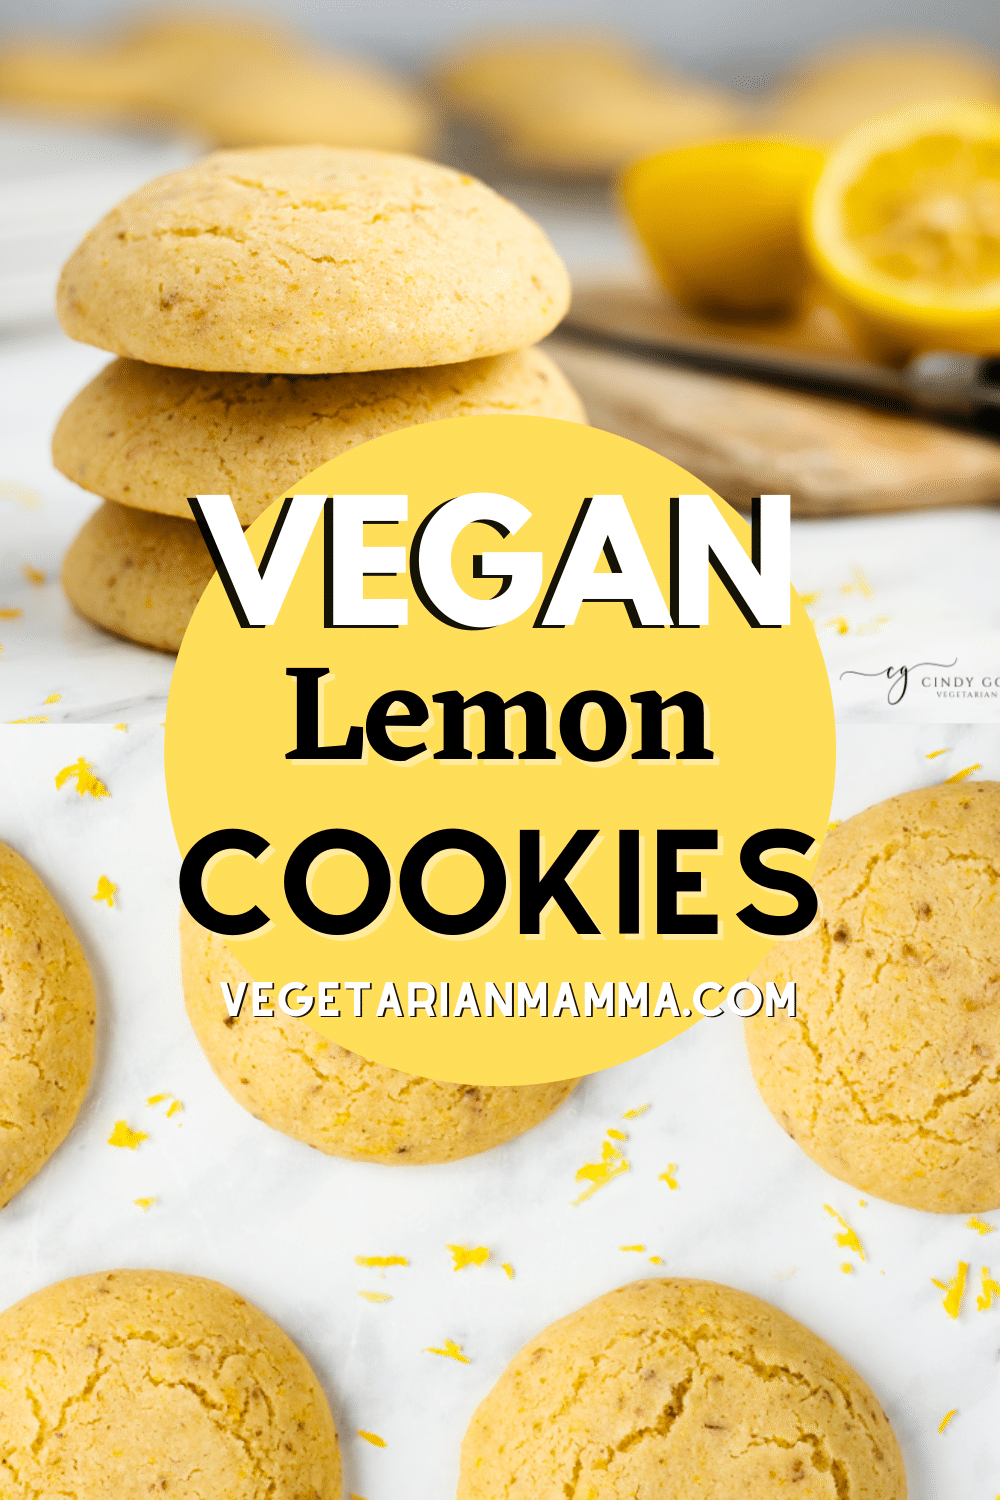 Vegan Lemon Cookies are soft, chewy and are packed with tangy lemon flavor. These Vegan Lemon Cookies come together with less than 10 ingredients. #vegan #cookies #lemon #lemoncookies #vegancookies #veganlemoncookies